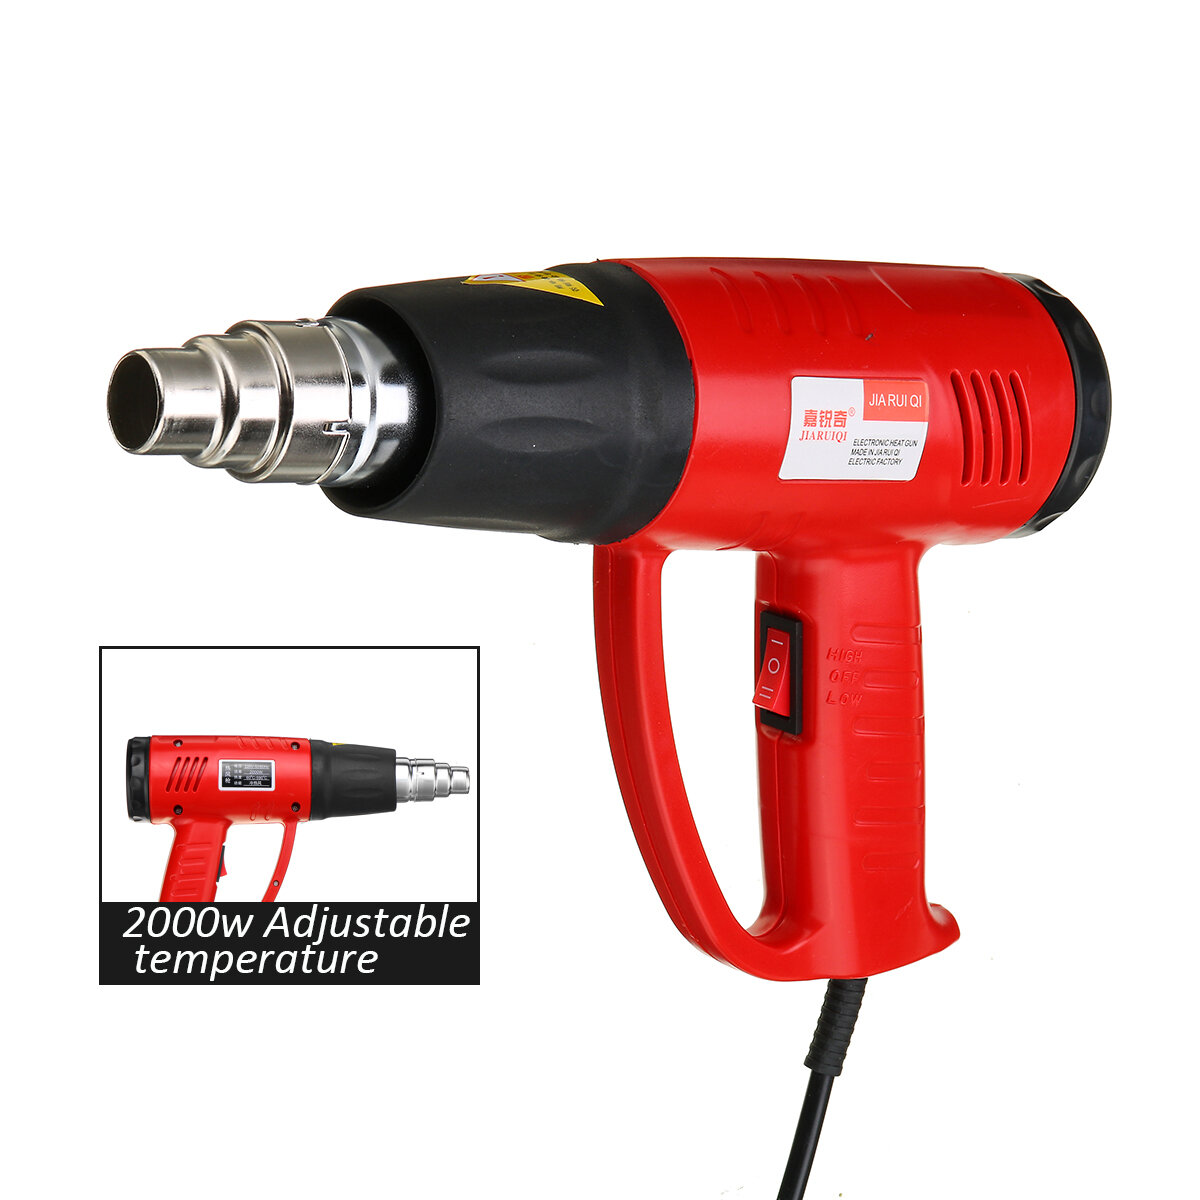 best price,2000w,hot,air,tool,coupon,price,discount